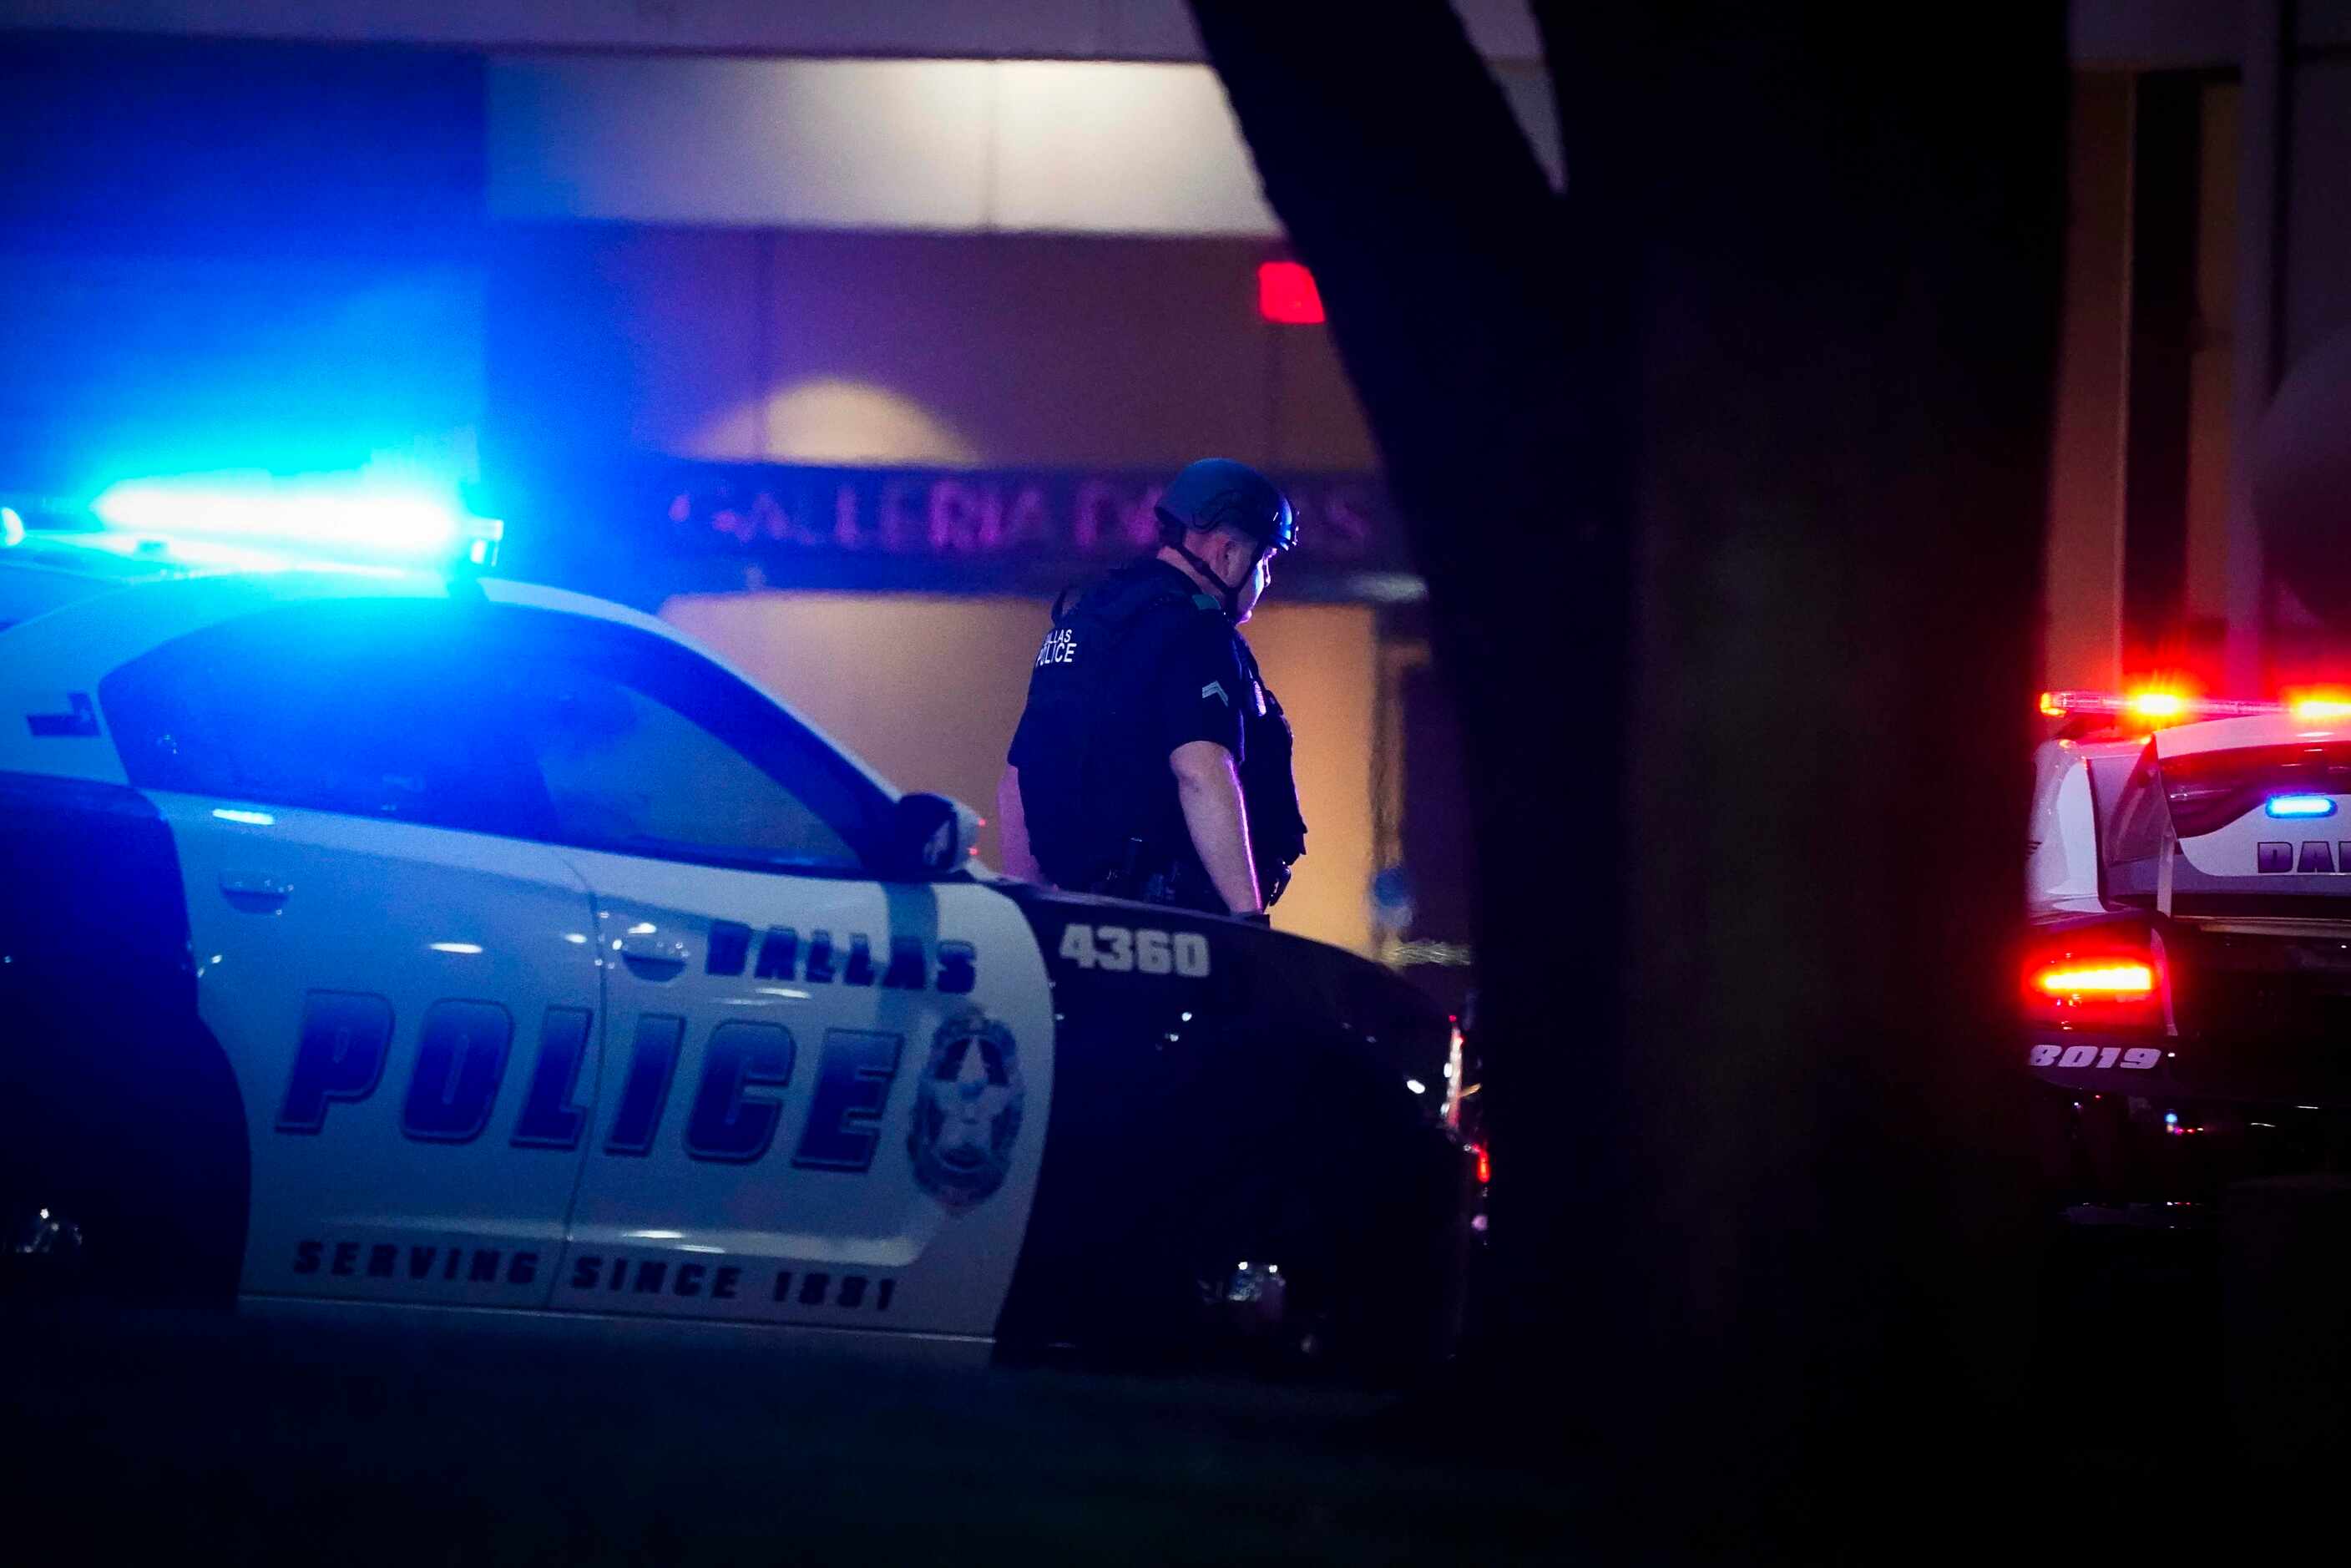 Dallas police work outside the Nordstrom store at the Galleria Dallas on Tuesday, June 16,...